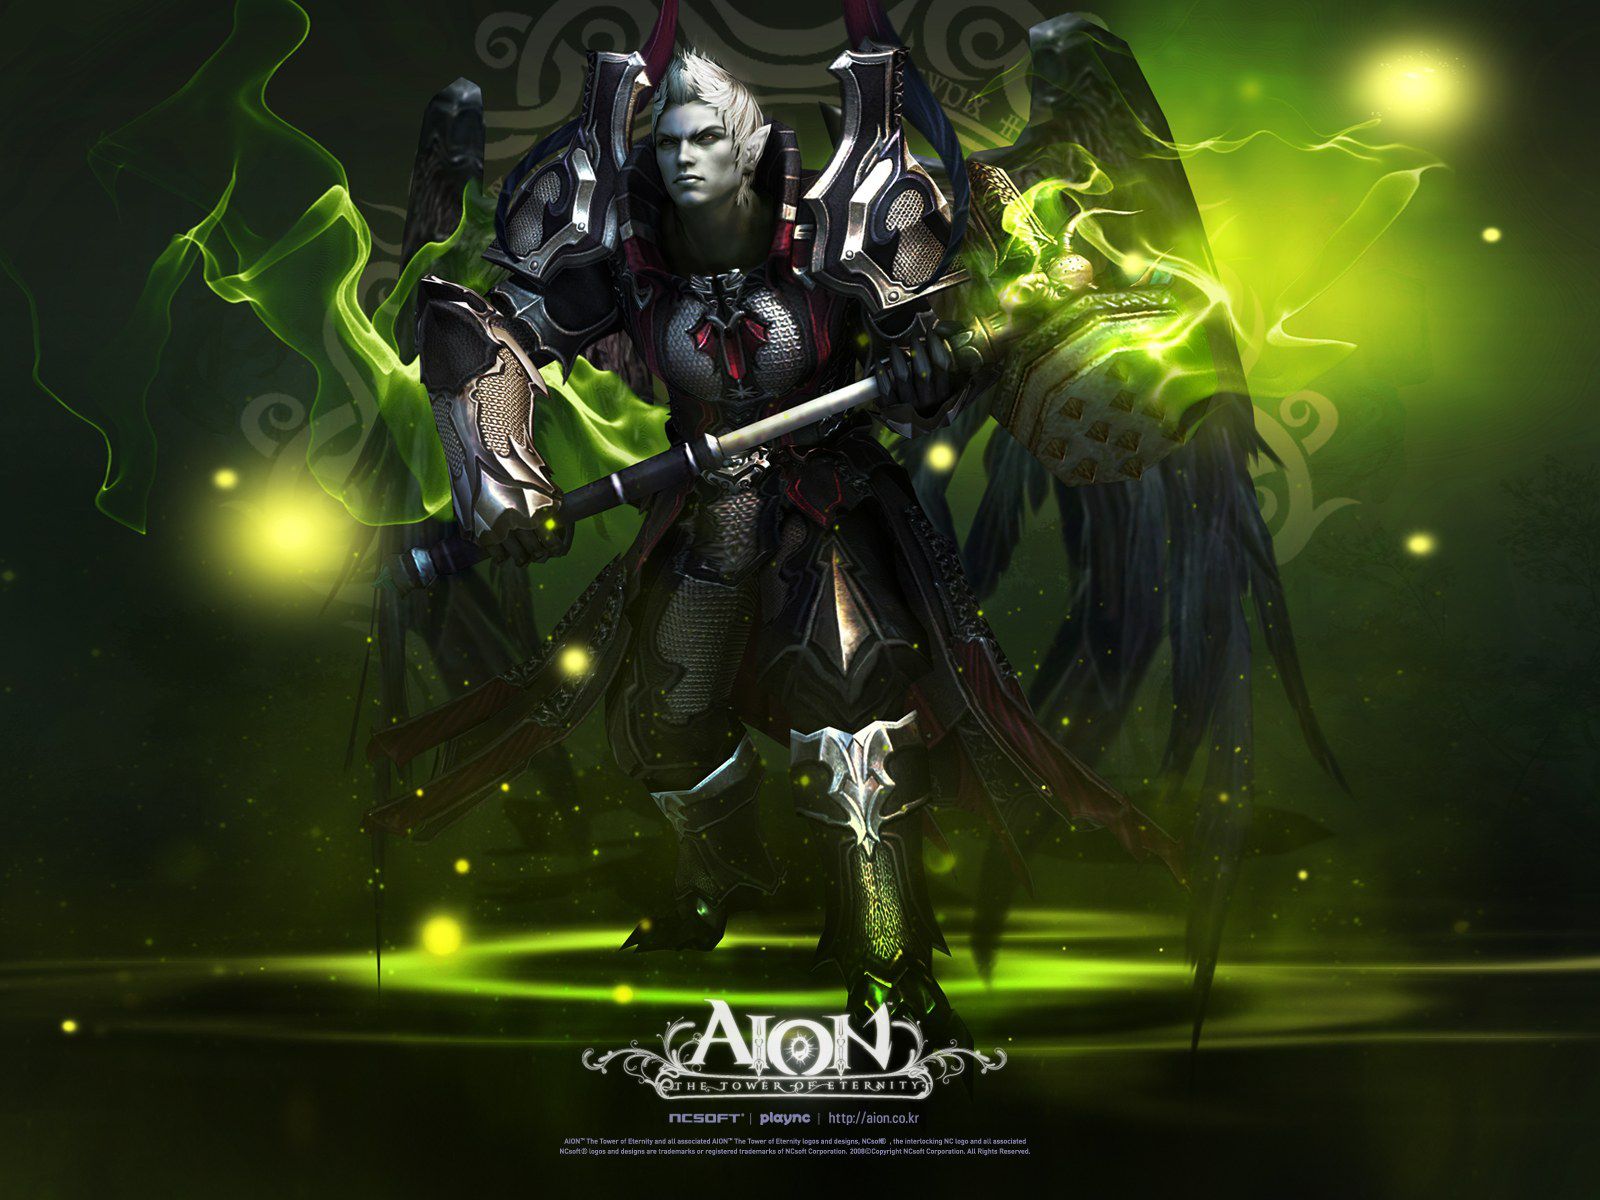 Download_Aion_Full_HD_Wallpapers-cgfrog_com_15